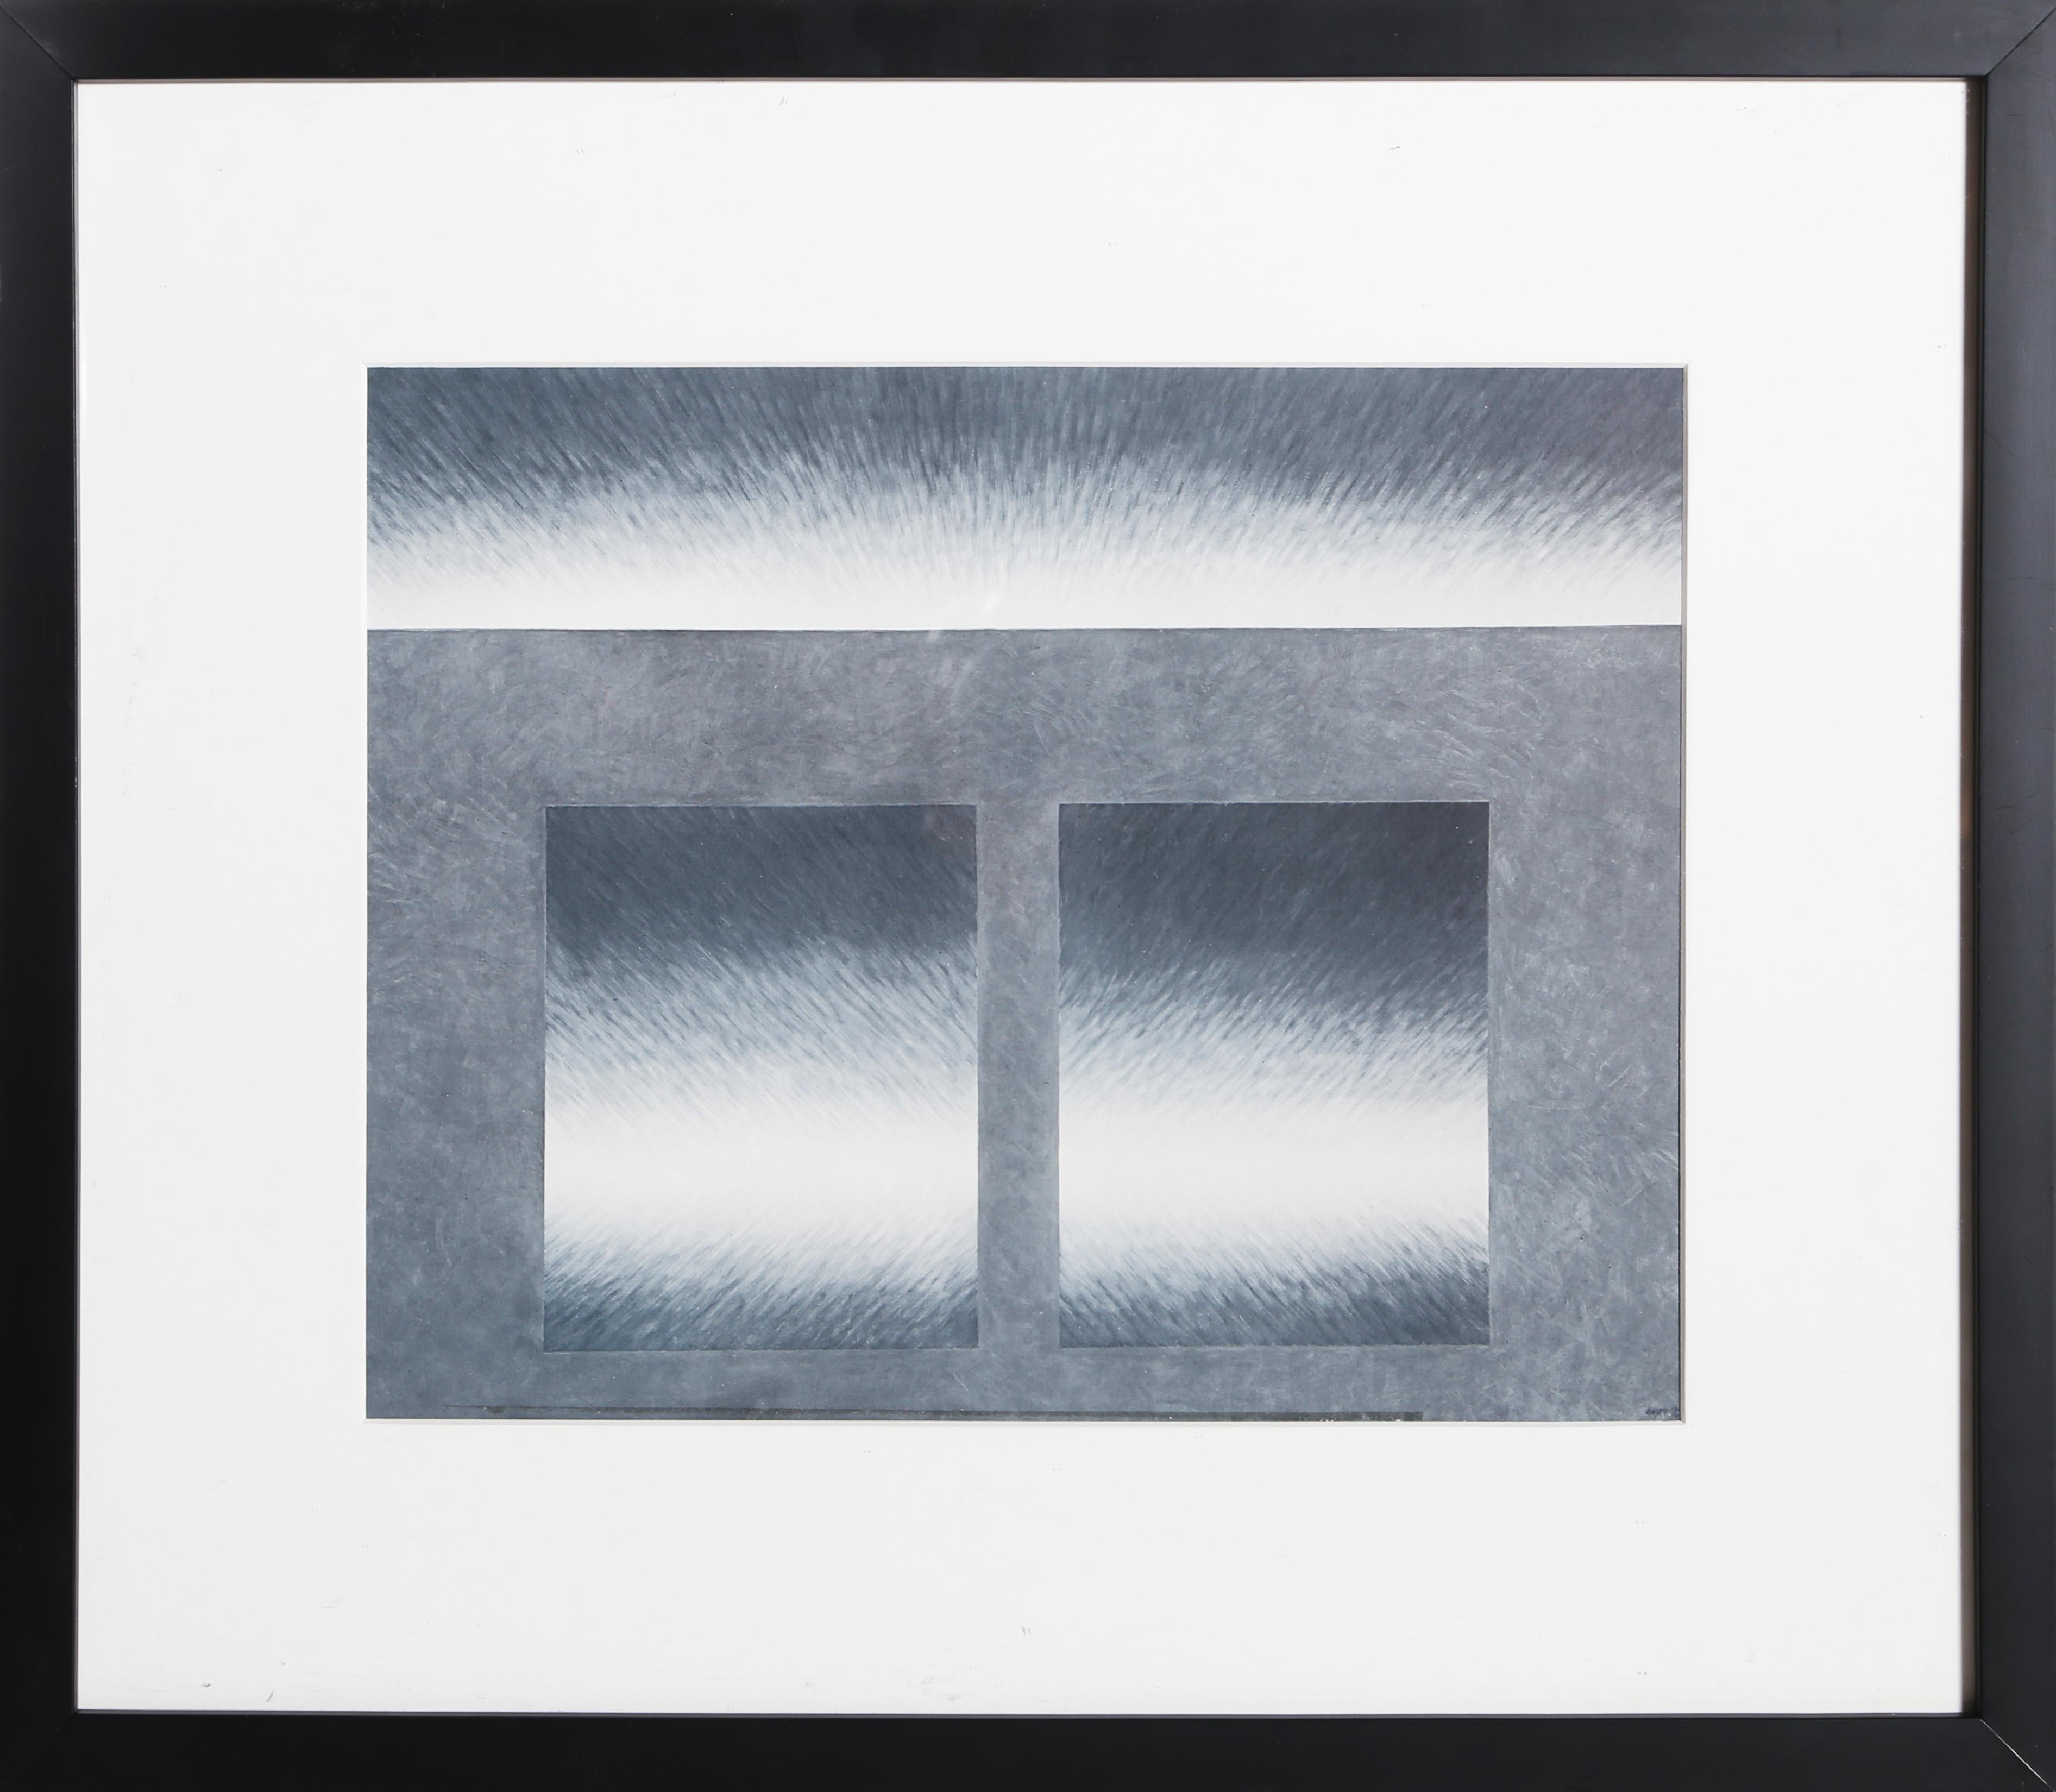 A print from the CCA folio of Herbert Bayer published in 1965. Nicely framed.

Untitled
Herbert Bayer, Austrian (1900–1985)
Date: 1964 (1965)
Offset Lithograph
Frame Size: 16.5 x 22 inches
Published by: Container Corporation of America, 1965